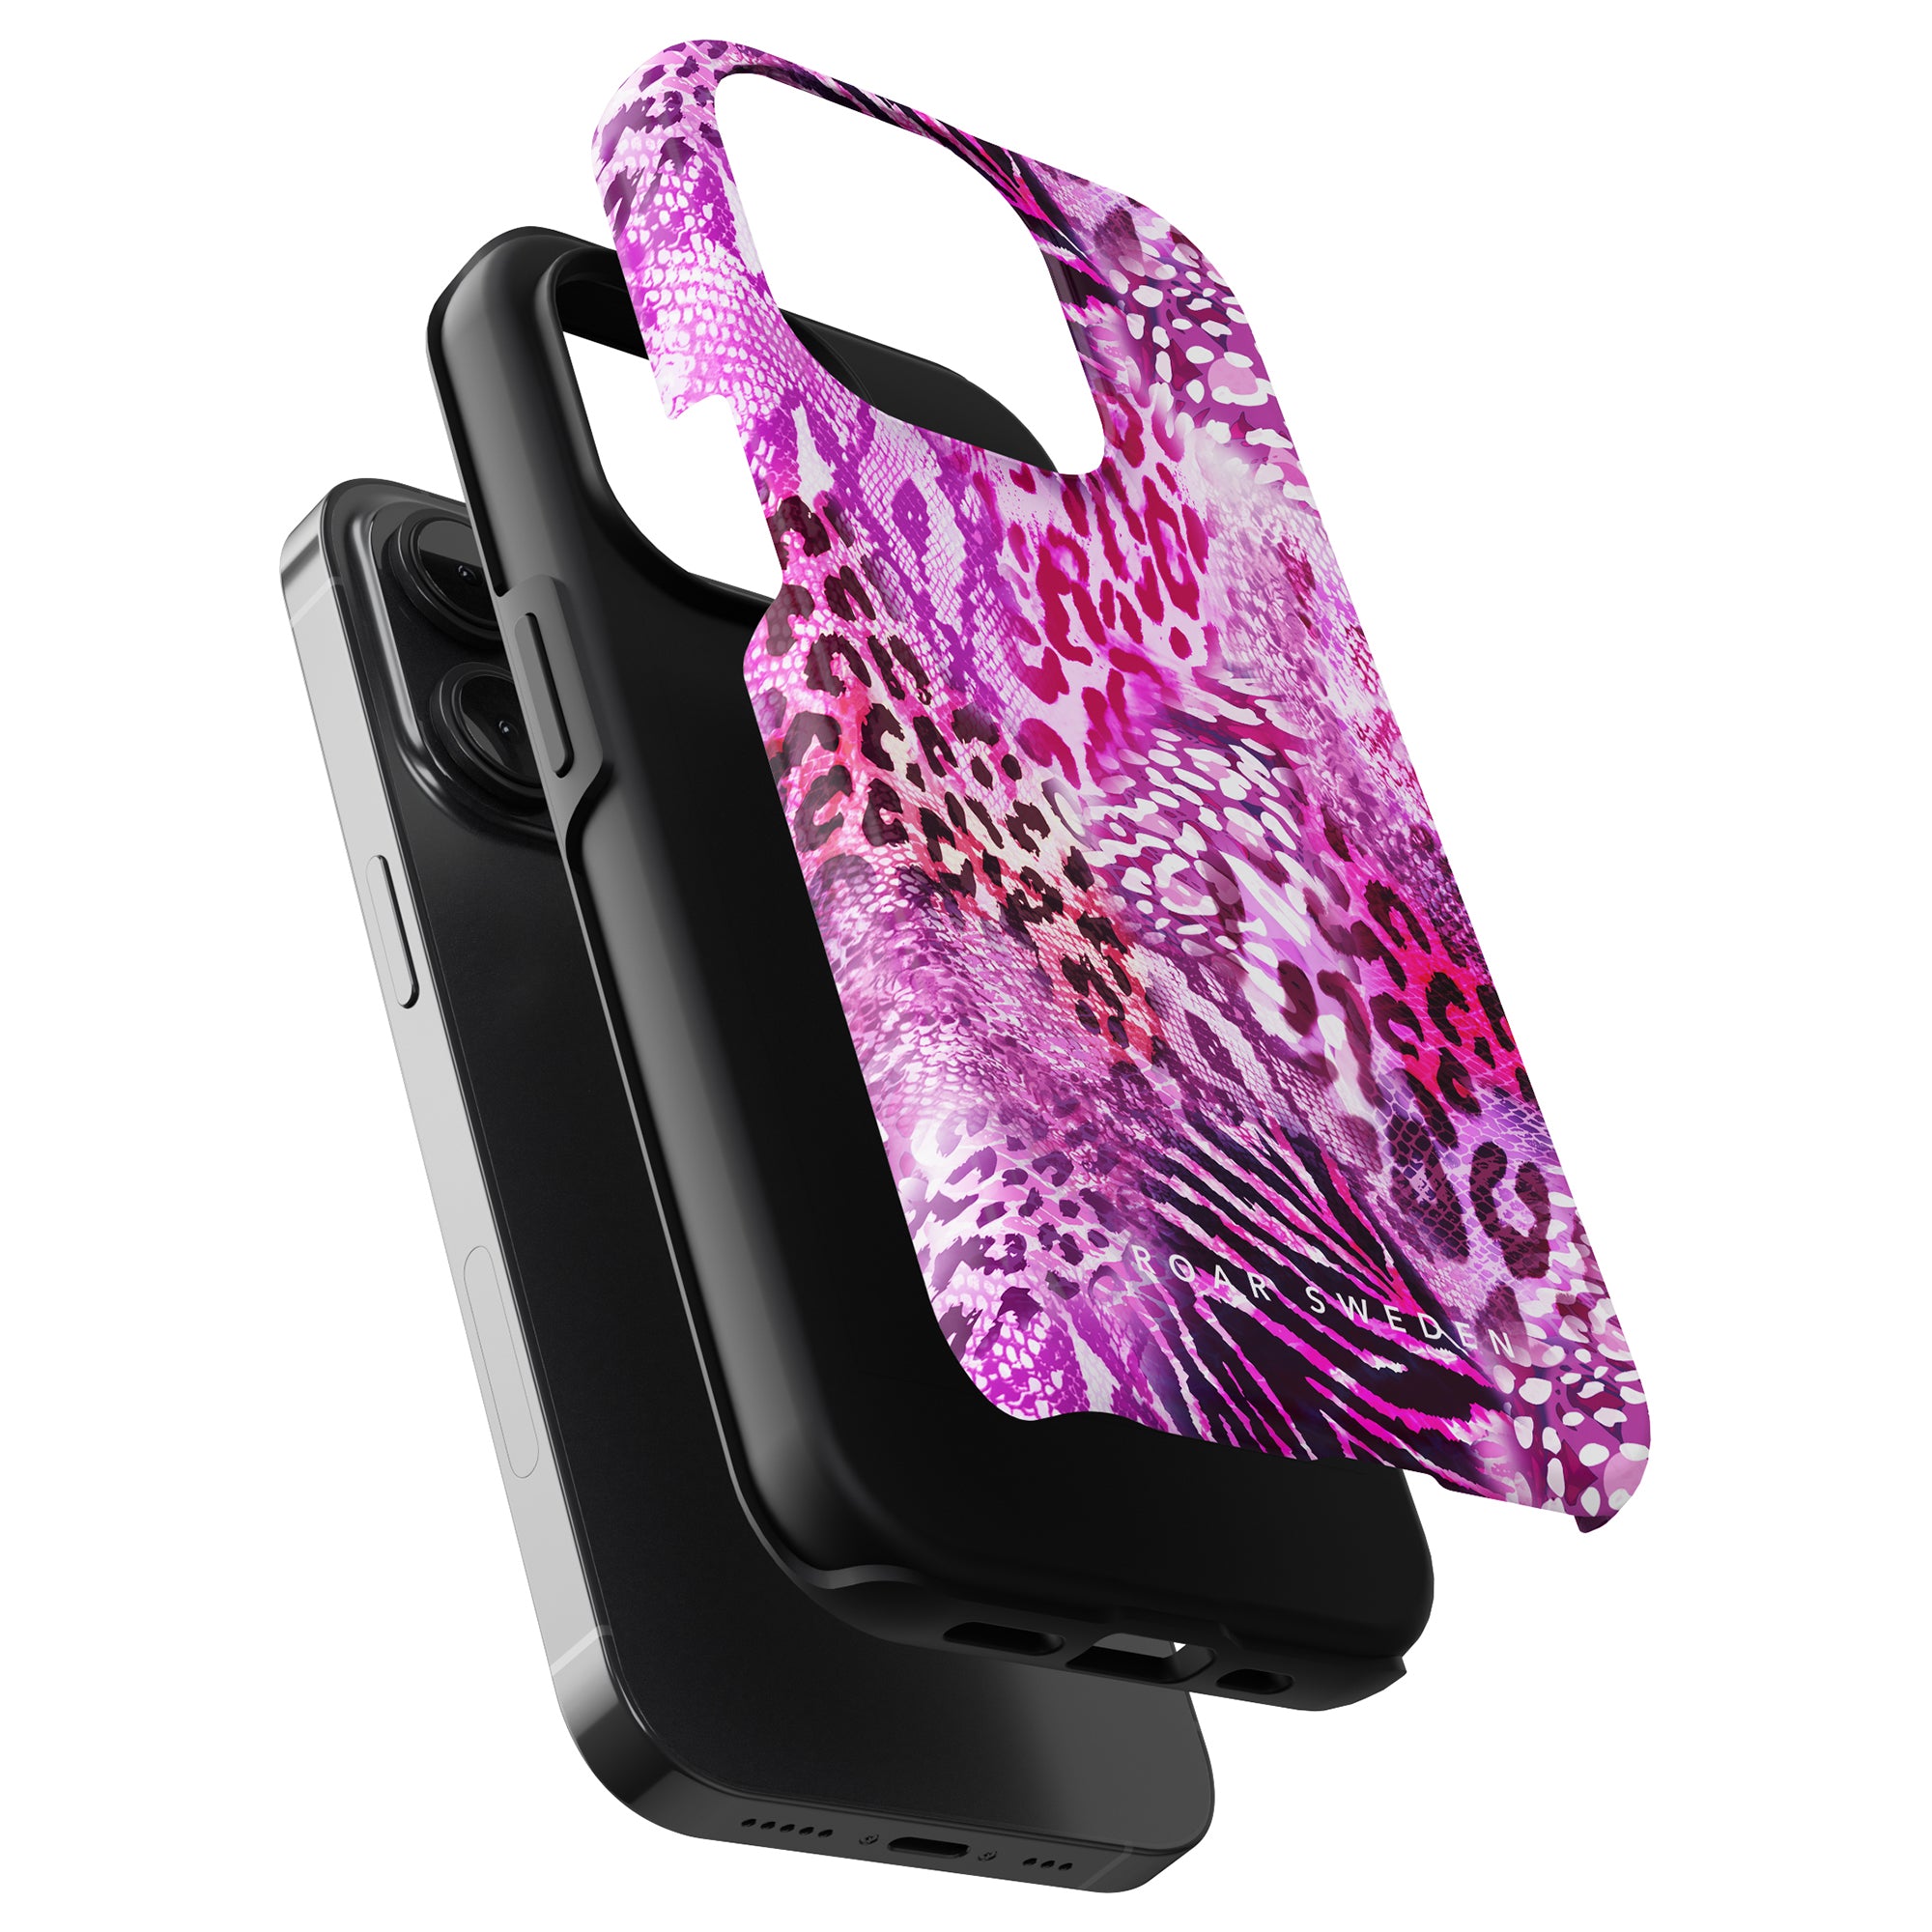 A black smartphone with a Swirl Leopard tough case from the Hybrid Collection, displayed on a white background.